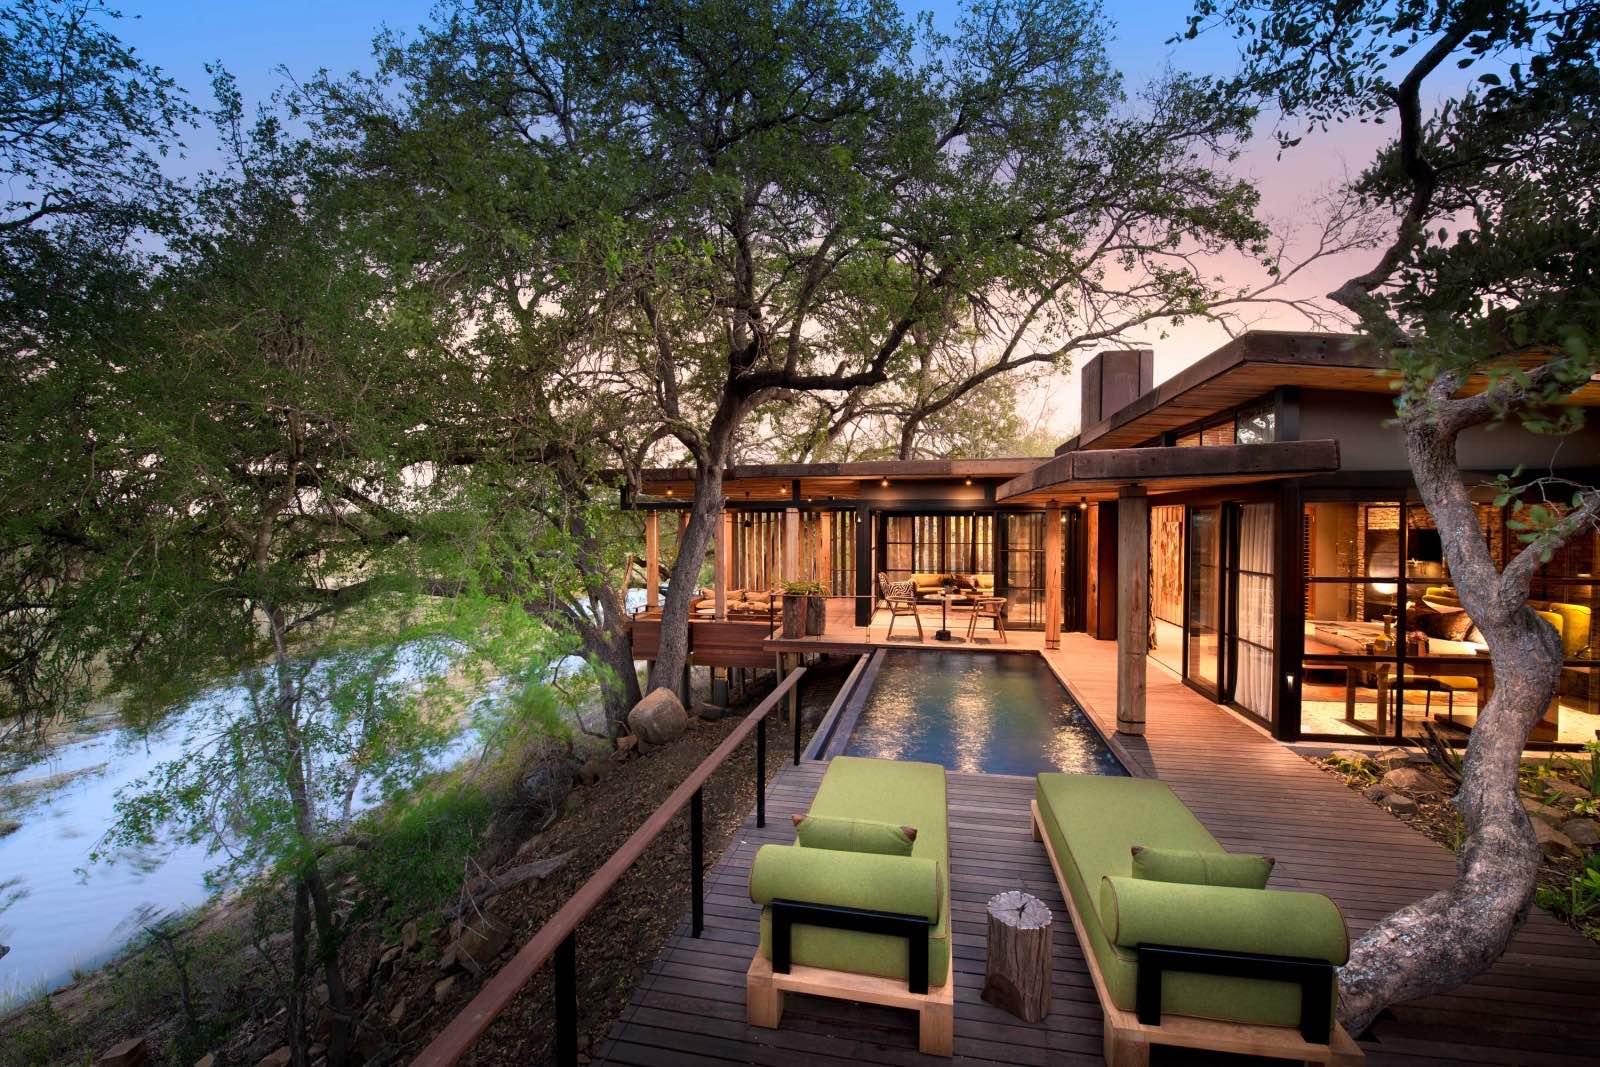 The expansive deck, lap pool, and viewing point of the Tengile guest suites